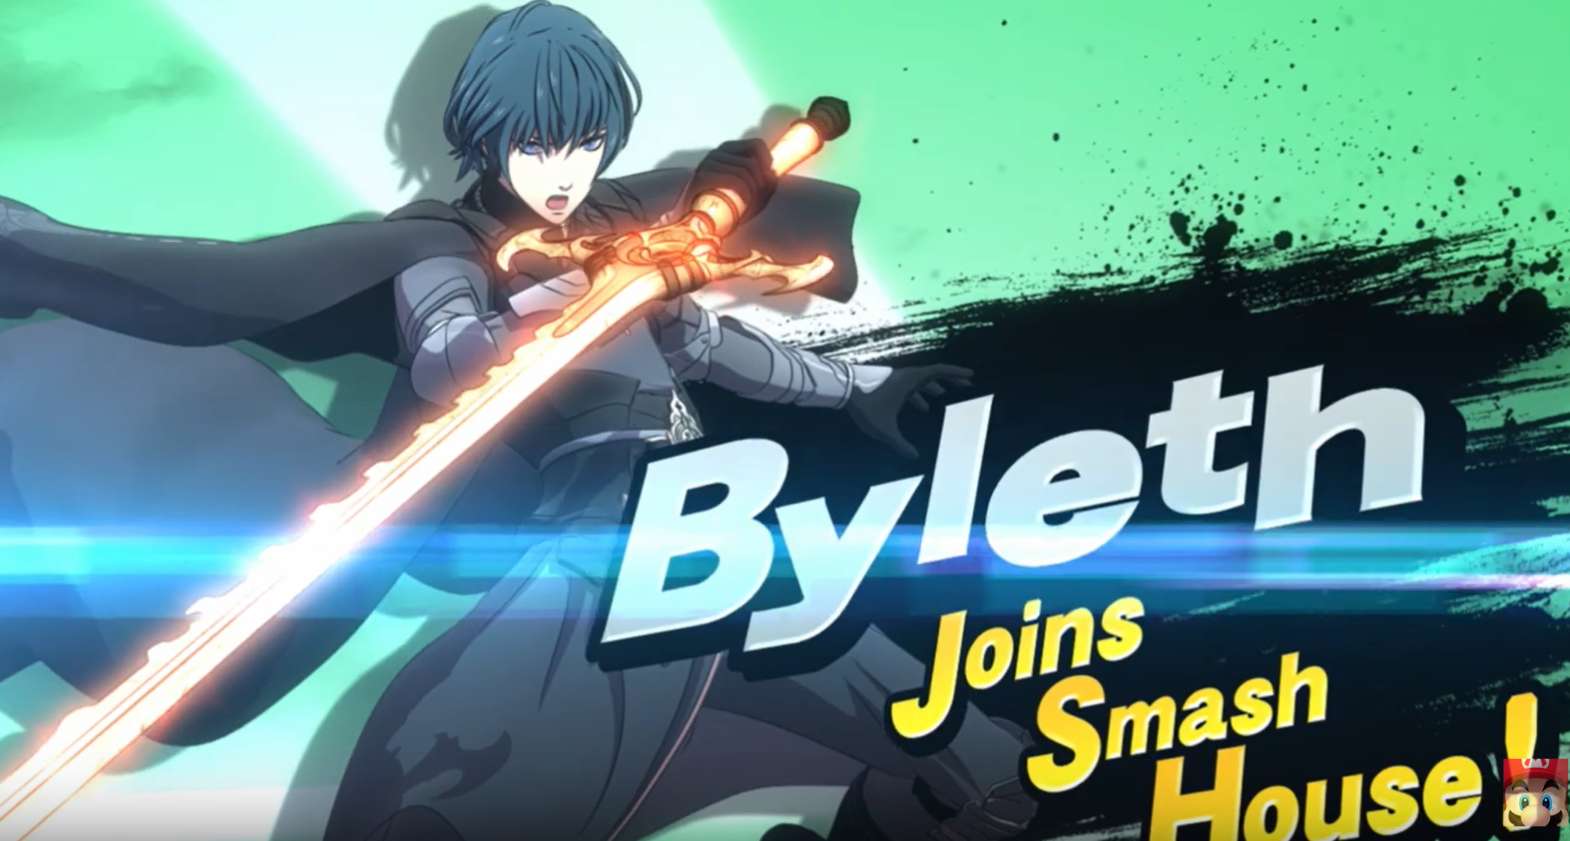 There Will Be No Amiibo Figure For Female Byleth From Super Smash Bros. Ultimate